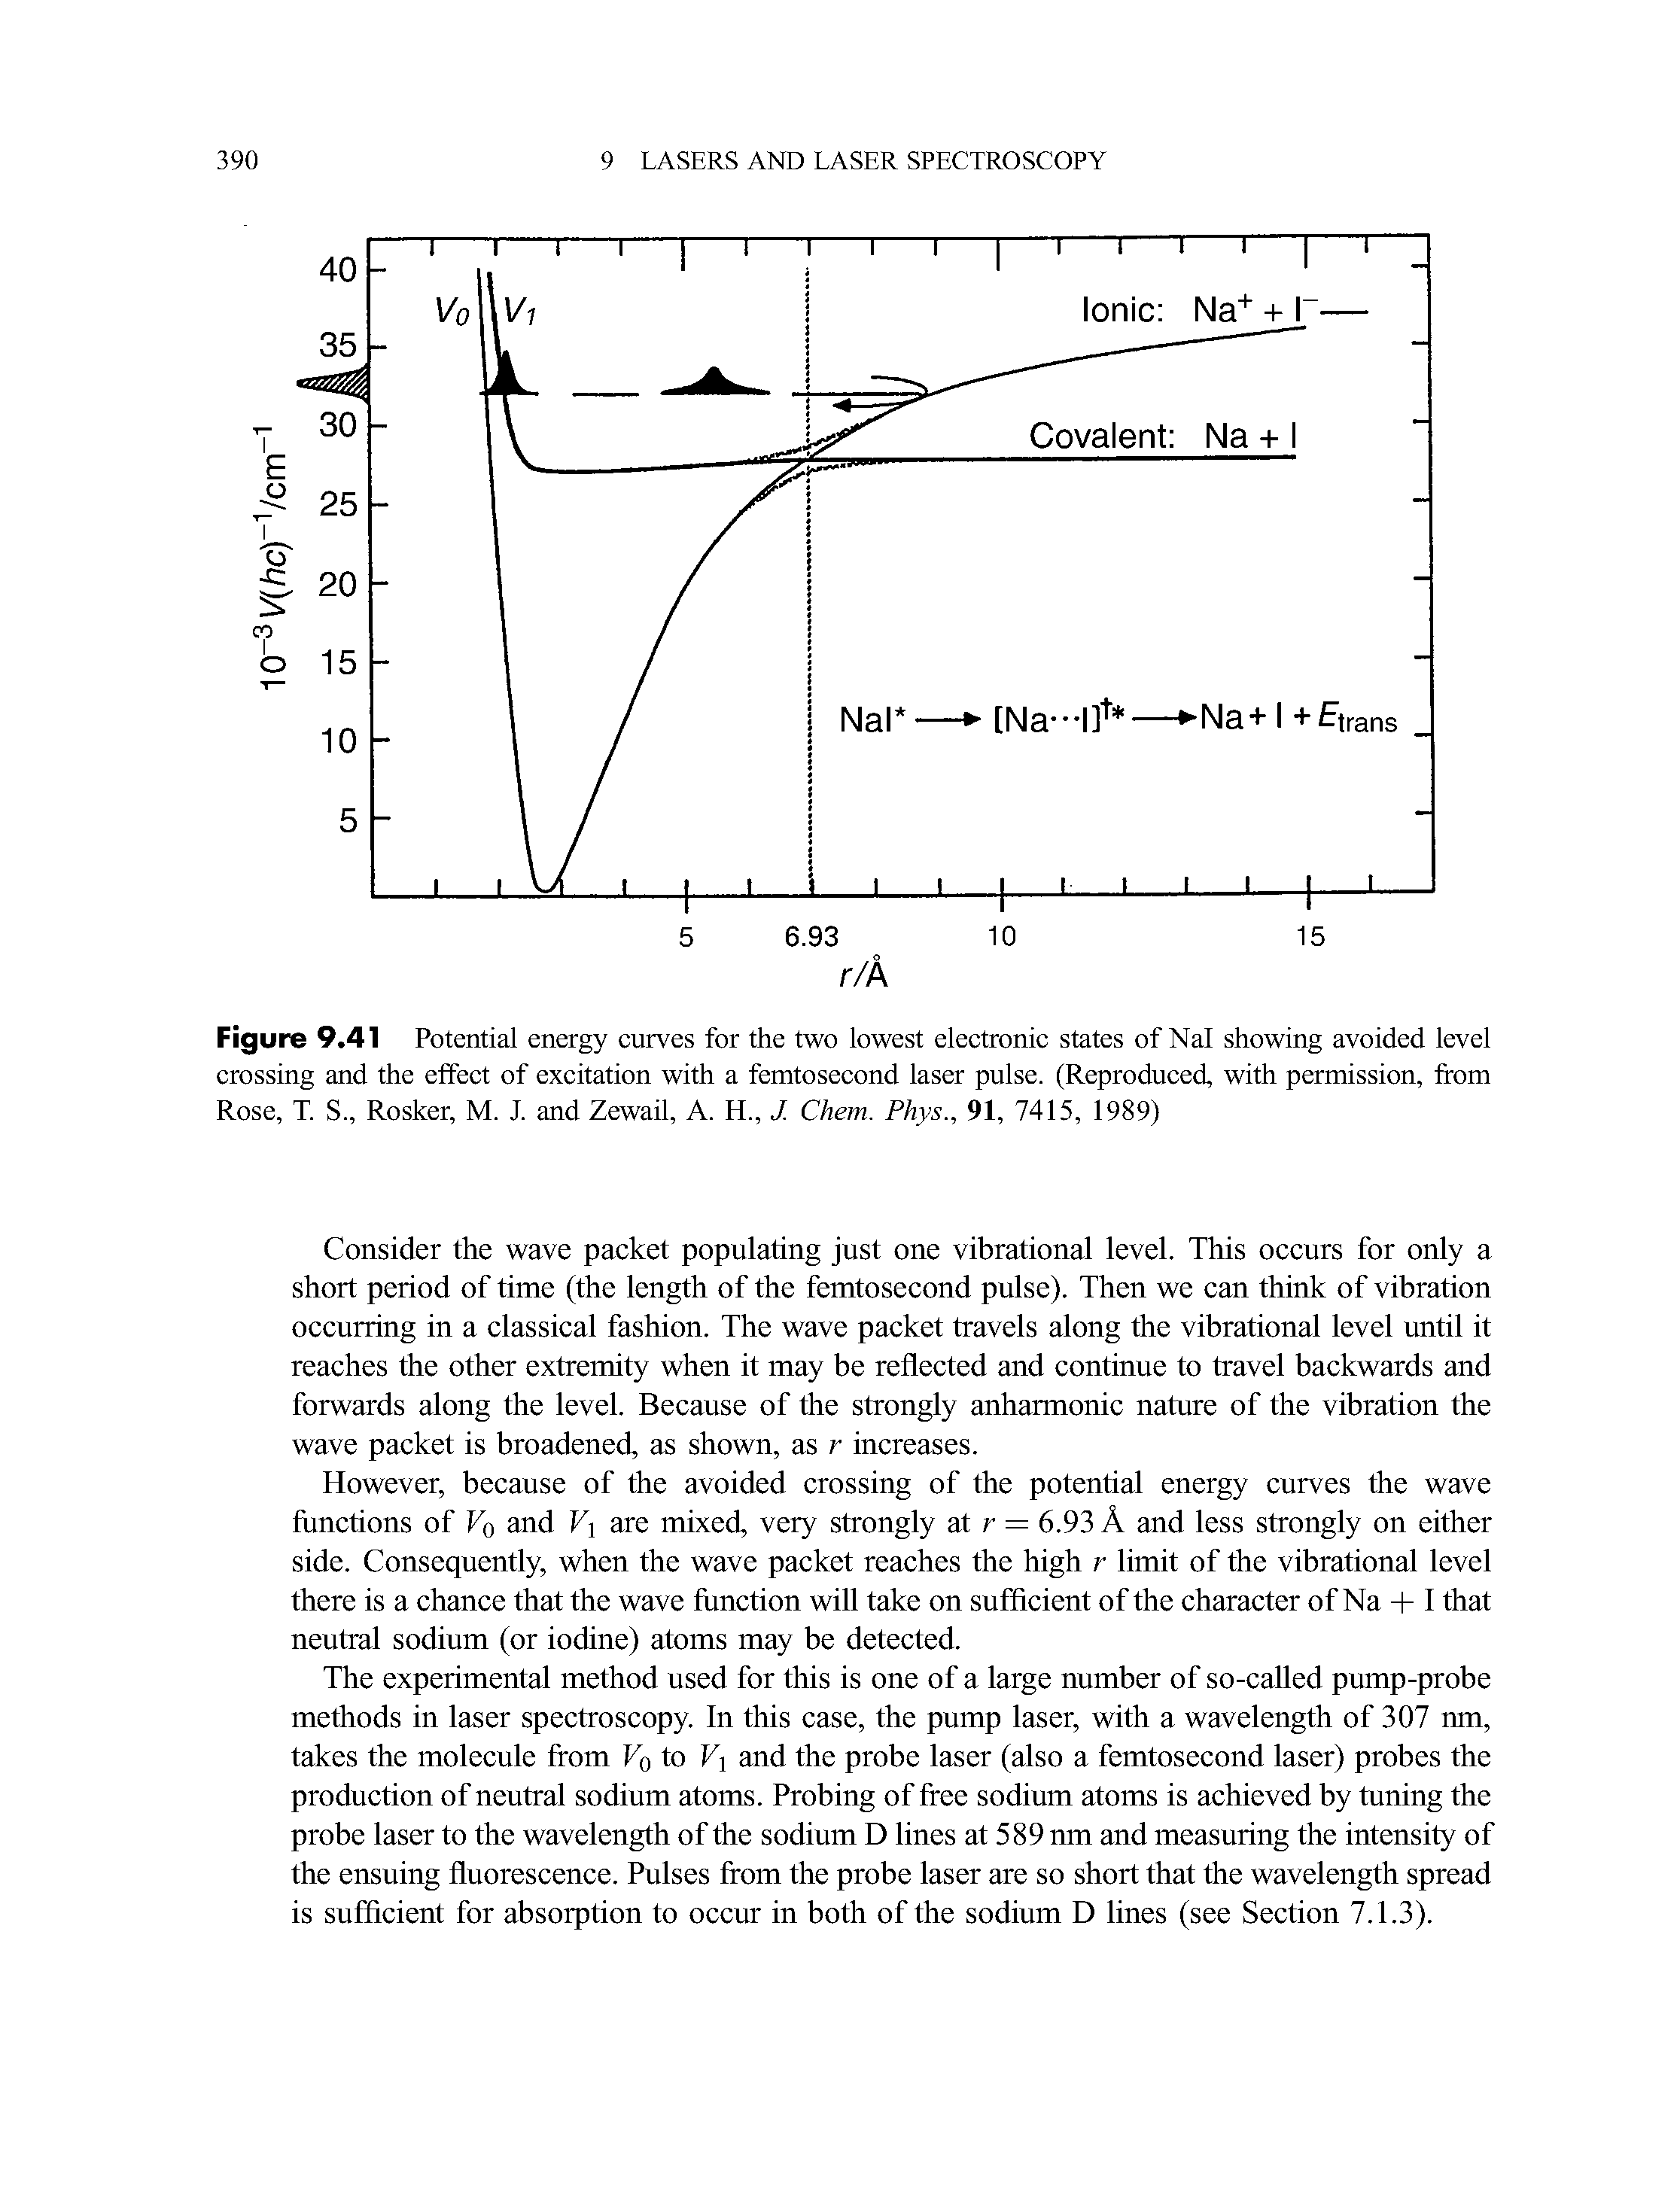 Figure 9.41 Potential energy curves for the two lowest electronic states of Nal showing avoided level crossing and the effect of excitation with a femtosecond laser pulse. (Reproduced, with permission, from Rose, T. S., Rosker, M. J. and Zewail, A. H., J. Chem. Phys., 91, 7415, 1989)...